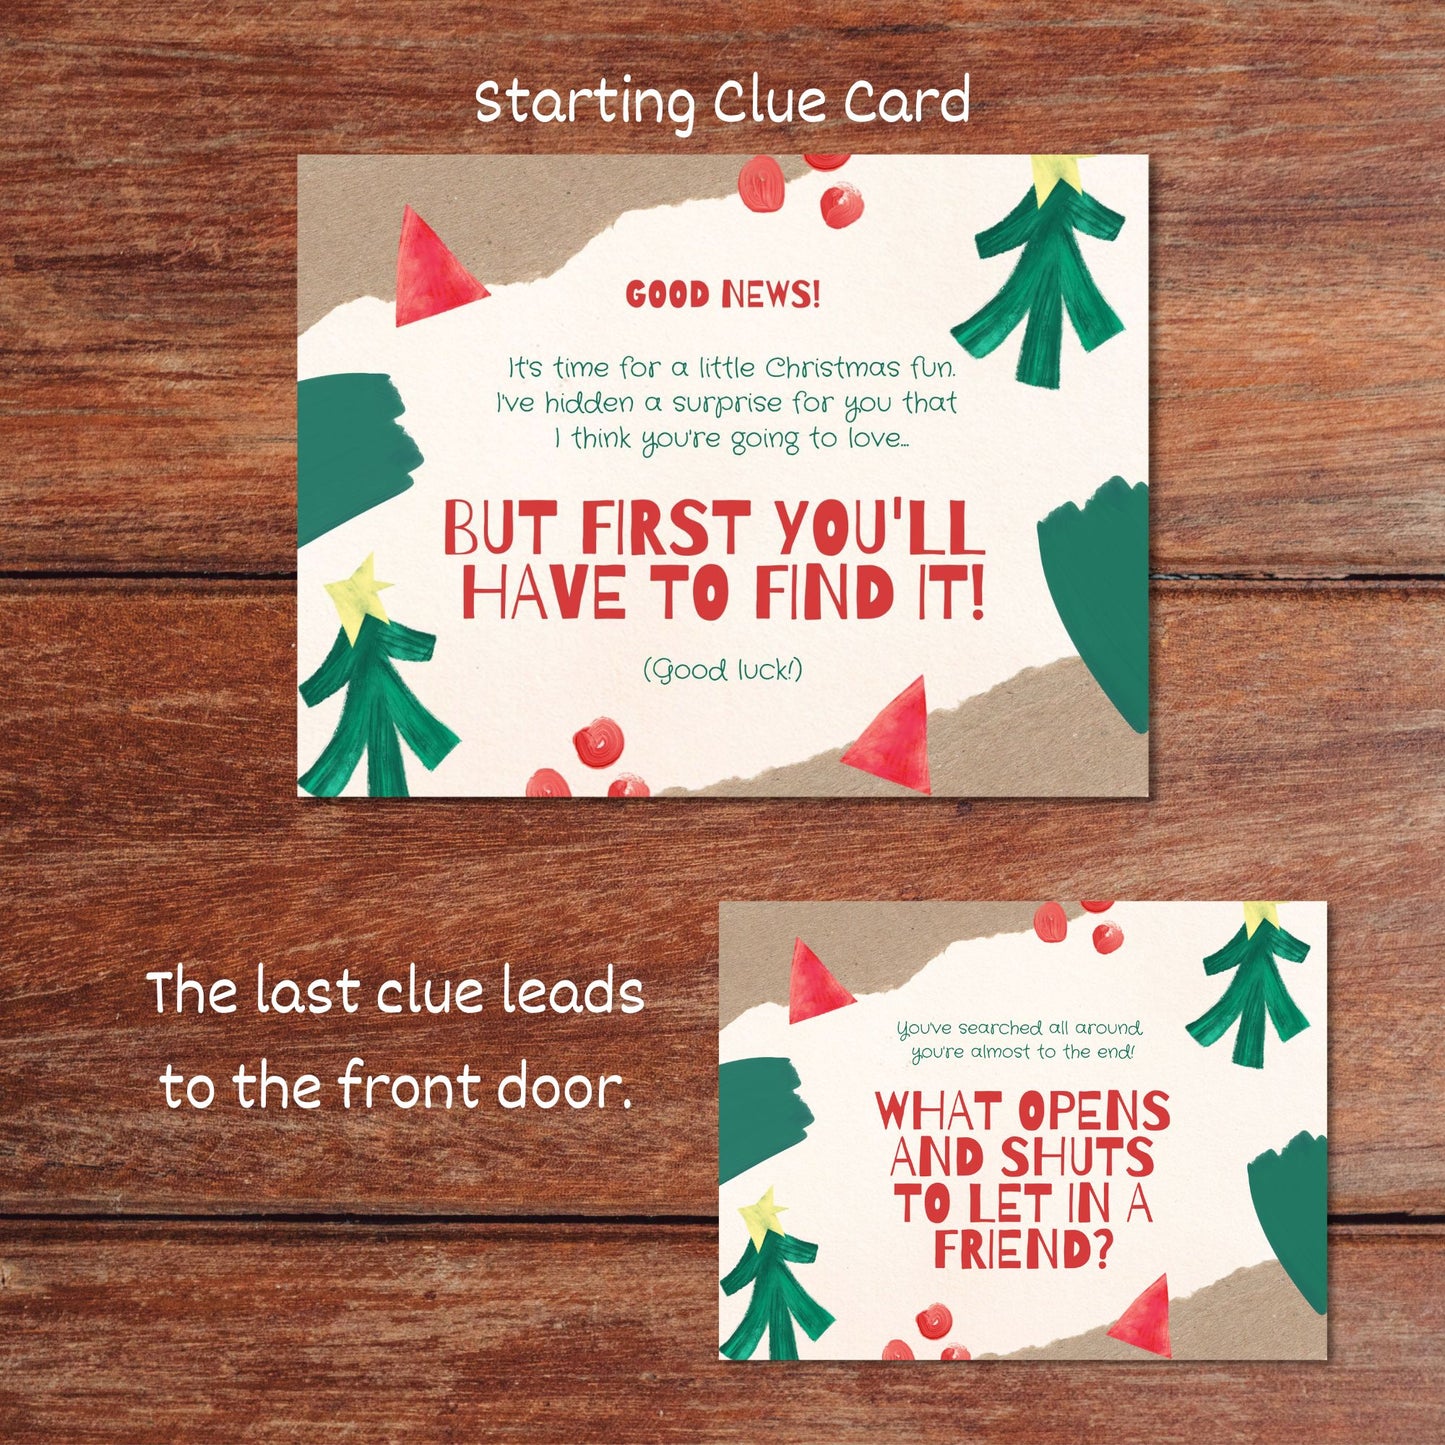 The starting and ending clue cards for the Classic Christmas Treasure Hunt are shown